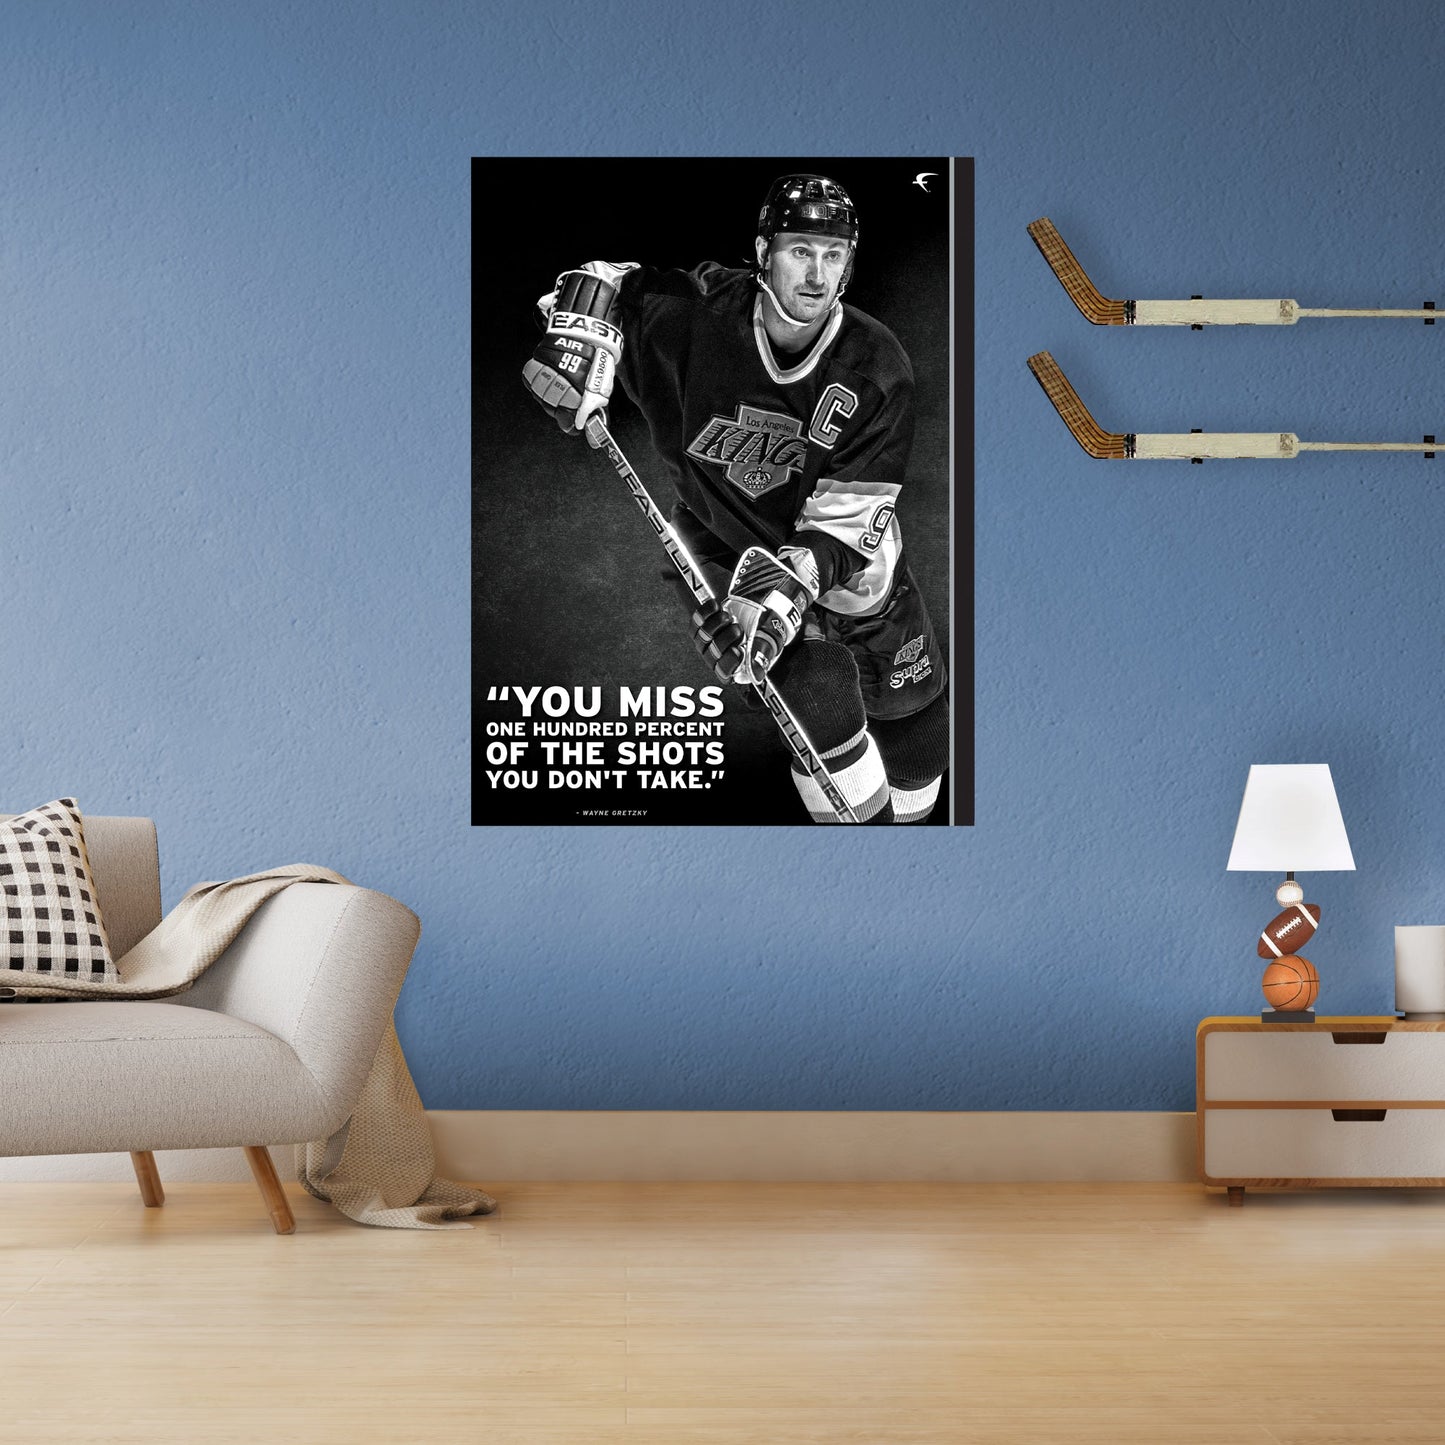 Los Angeles Kings: Wayne Gretzky Inspirational Poster - Officially Licensed NHL Removable Adhesive Decal